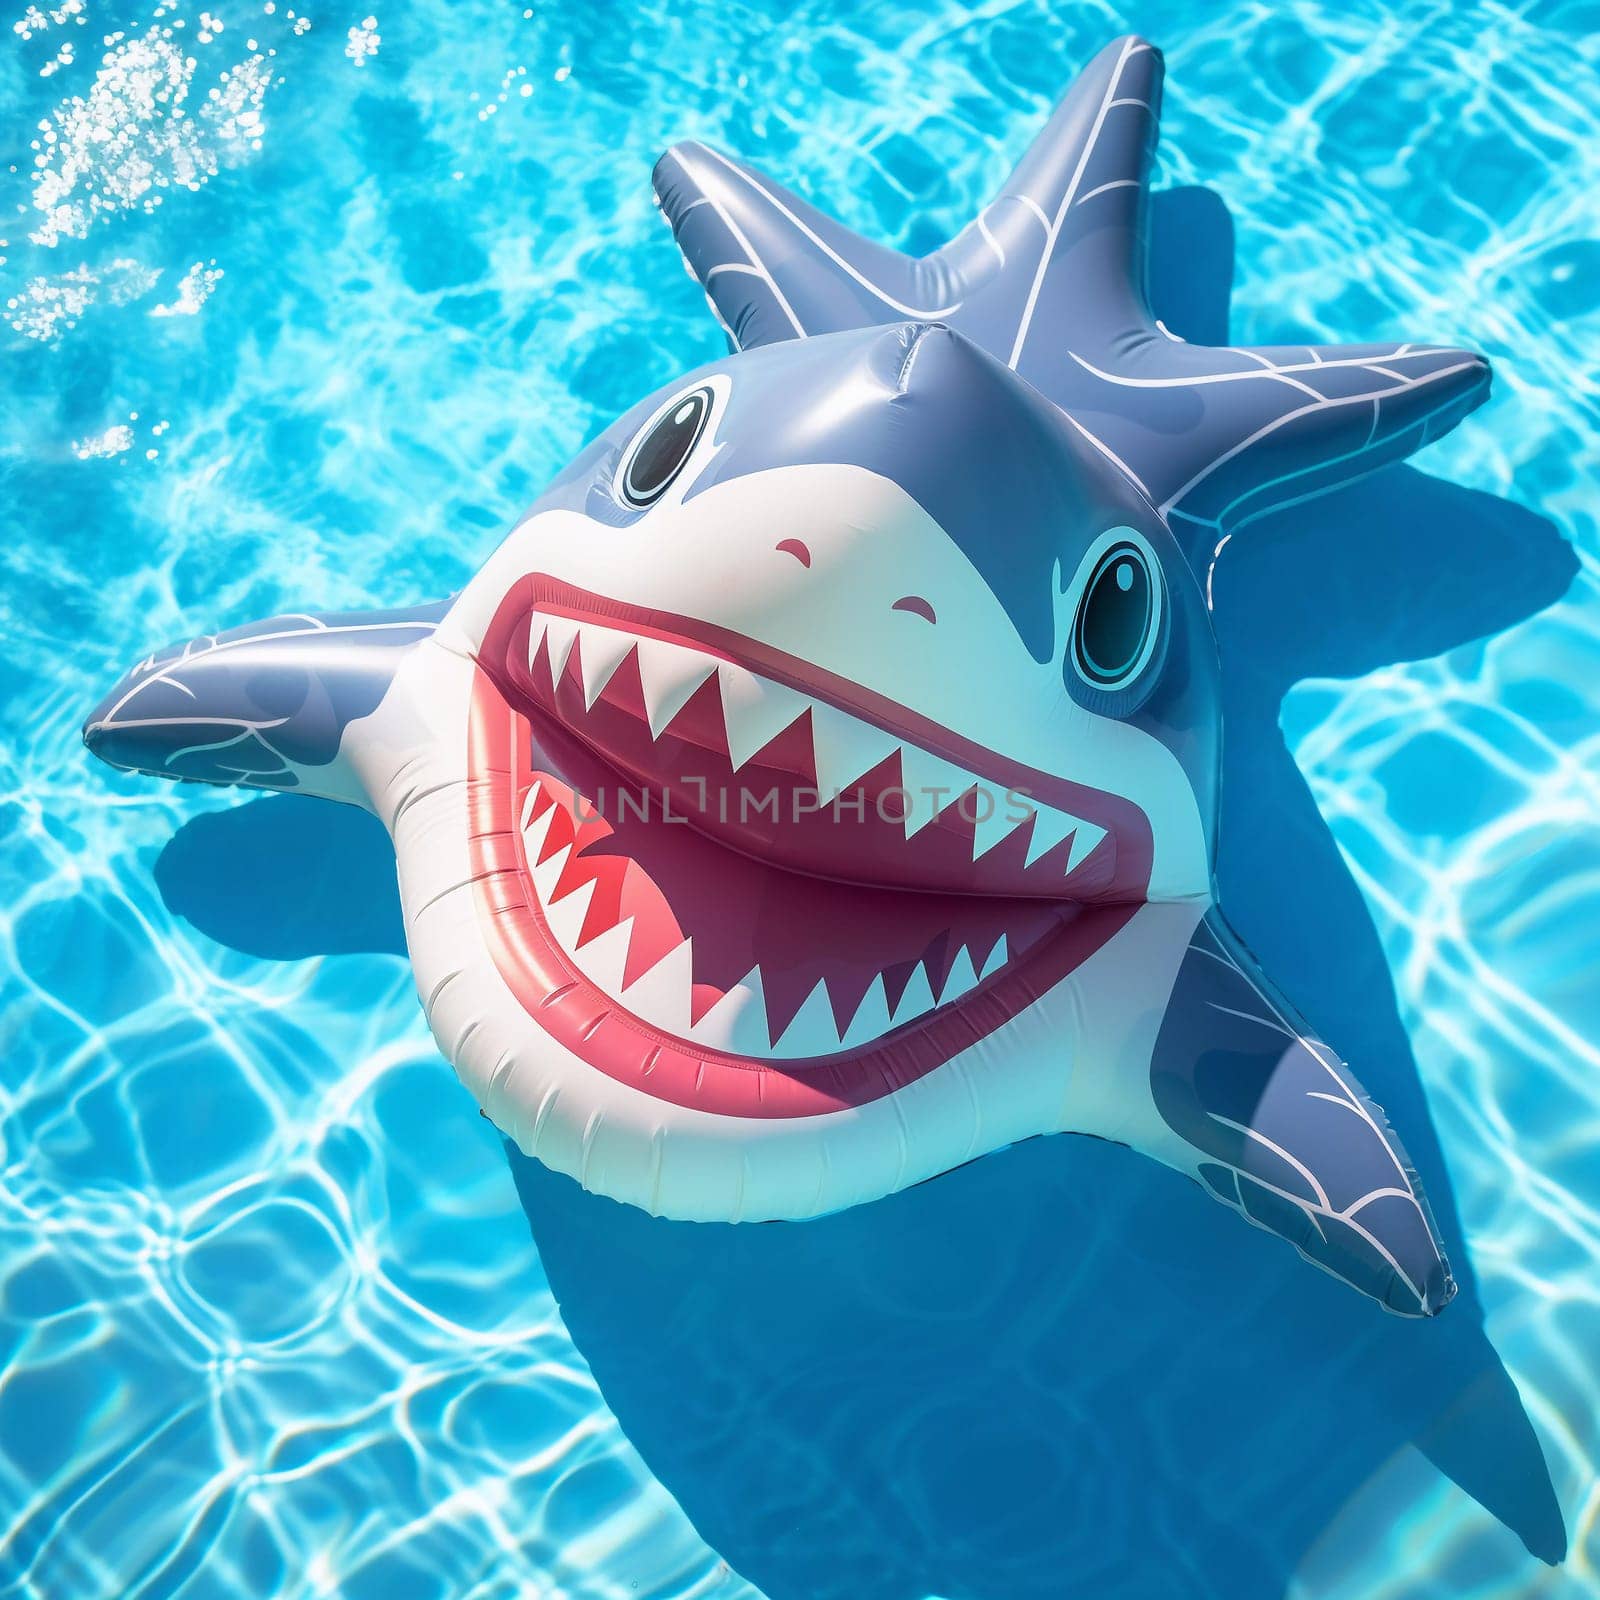 Shark Air Mattress. Floats on the surface of the water in the pool. Summer colorful vacation background.